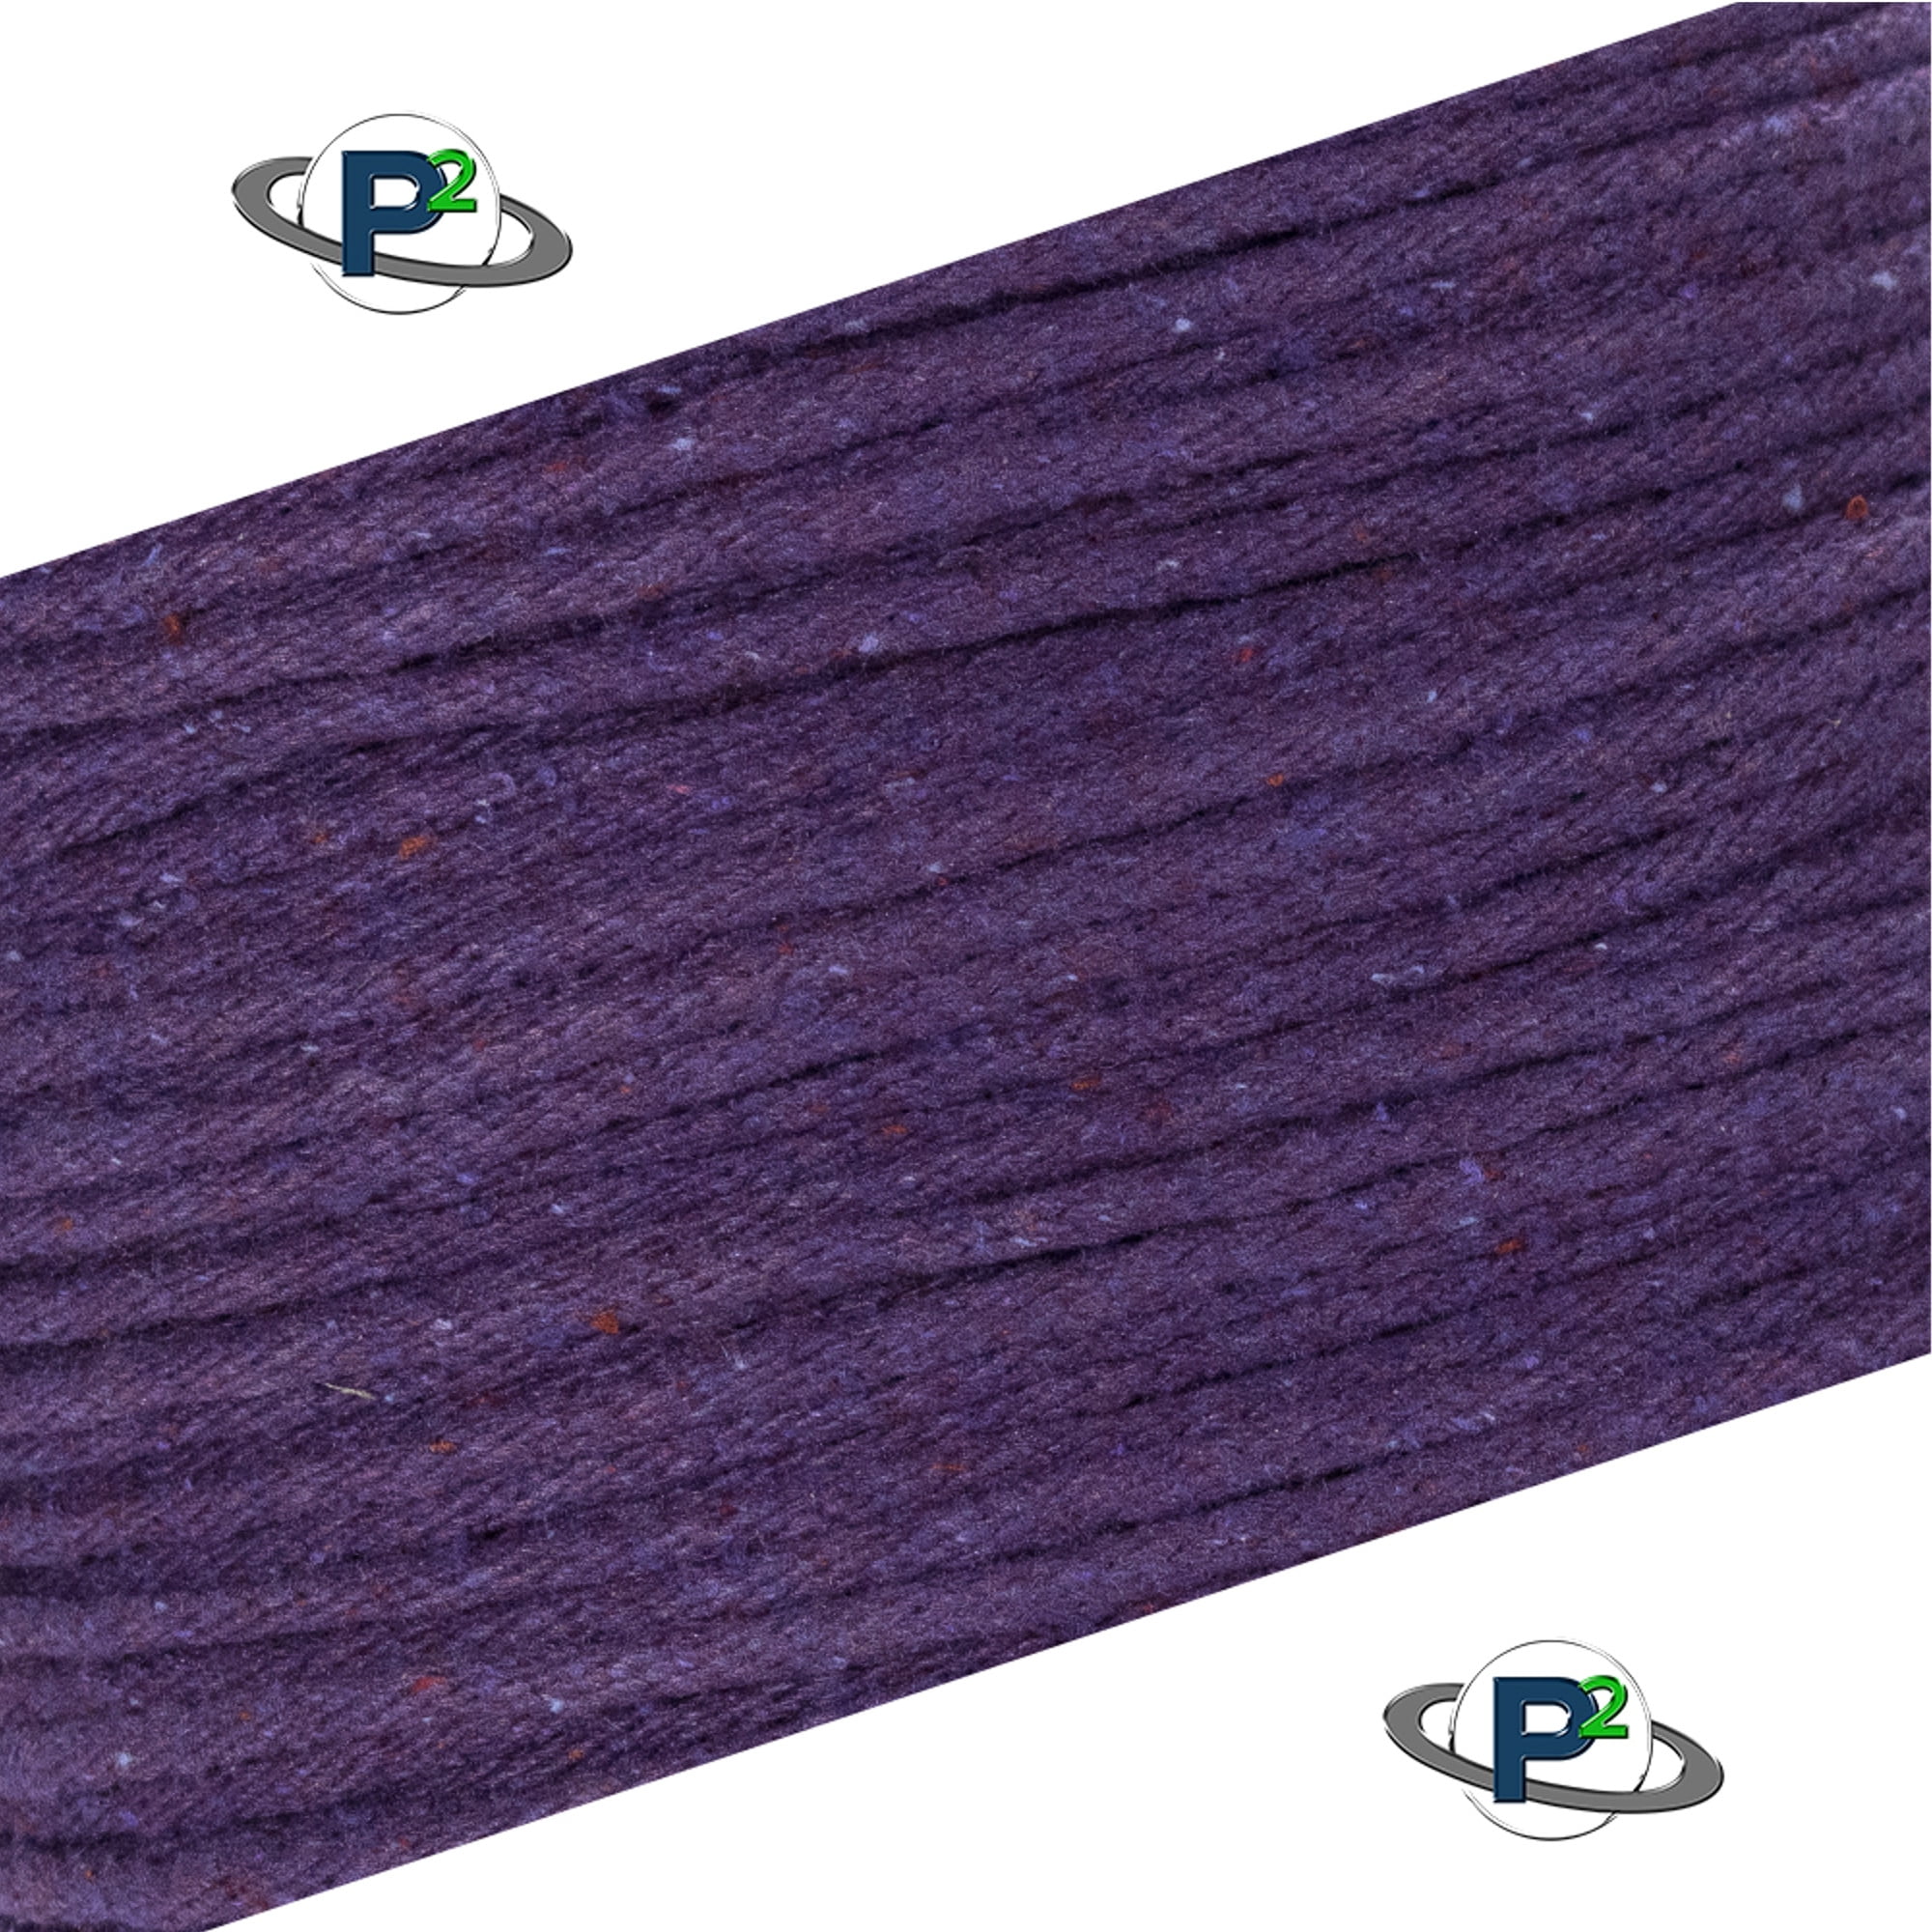 Paracord Planet Solid Braid Poly Cotton Rope 1/4 3/8 Sash Cord Available in Various Colors 1/2 3/16 and 1/8 inch Sizes 